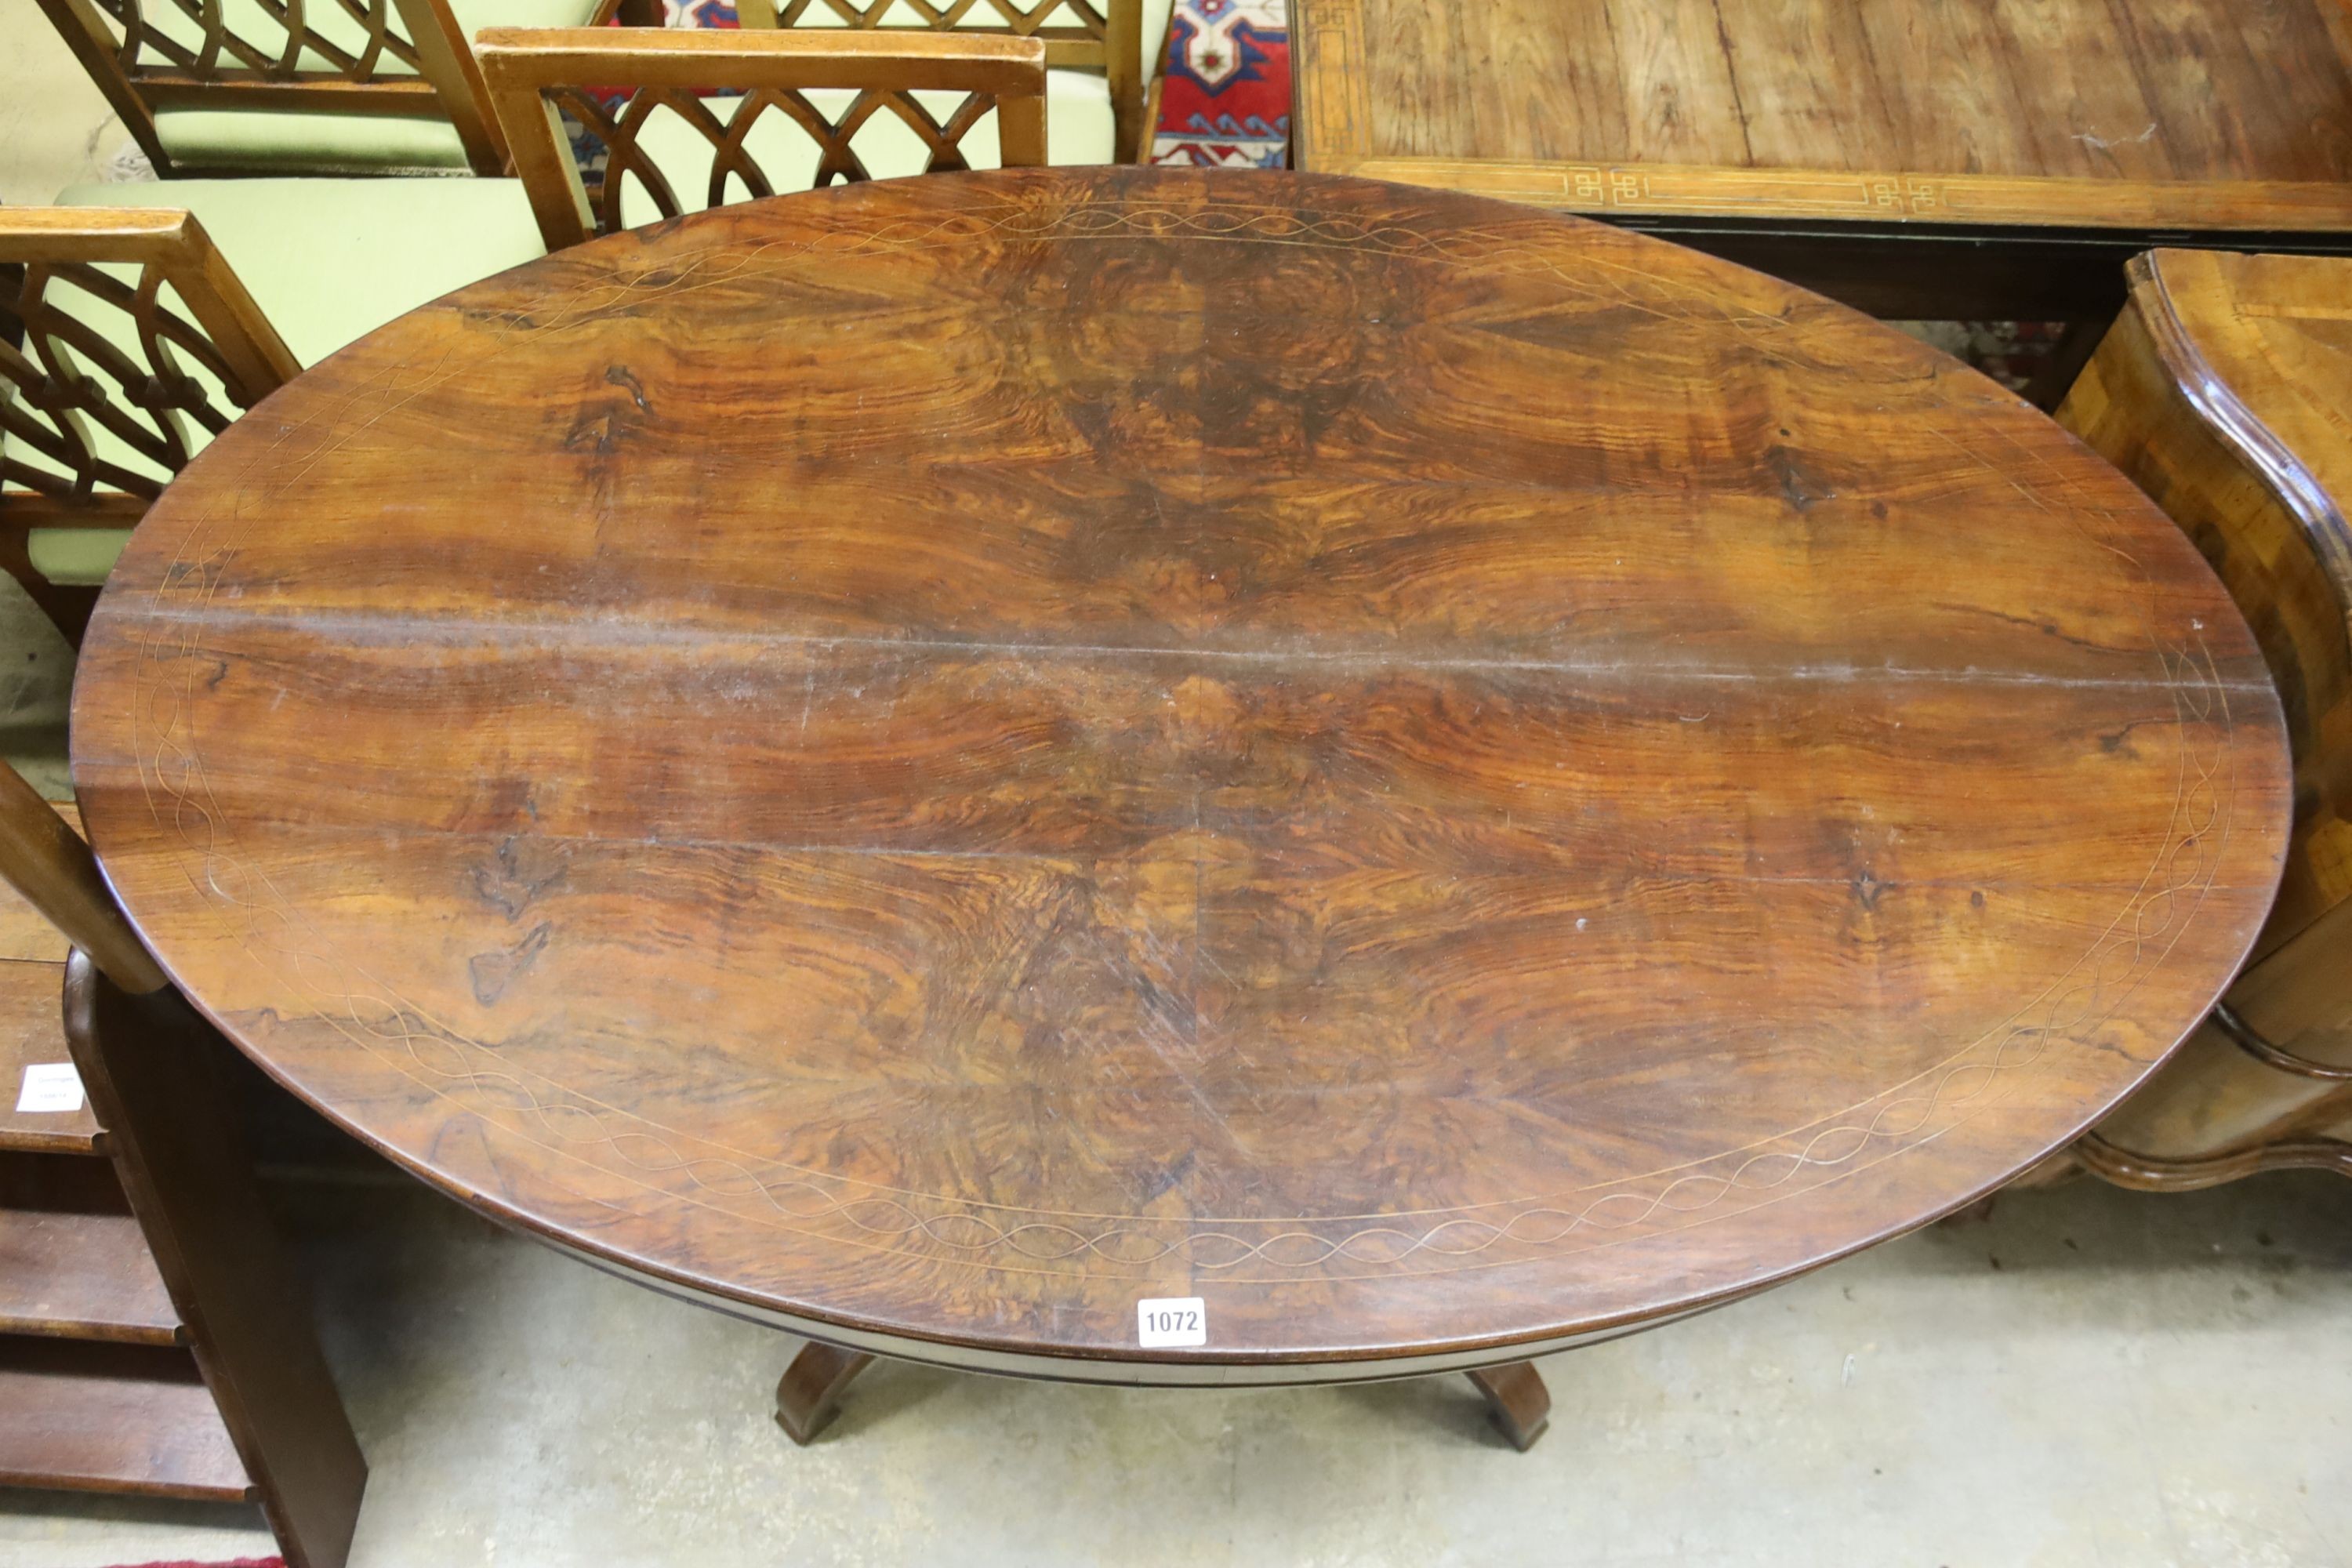 A 19th century French oval walnut centre table, width 130cm, depth 78cm, height 79cm